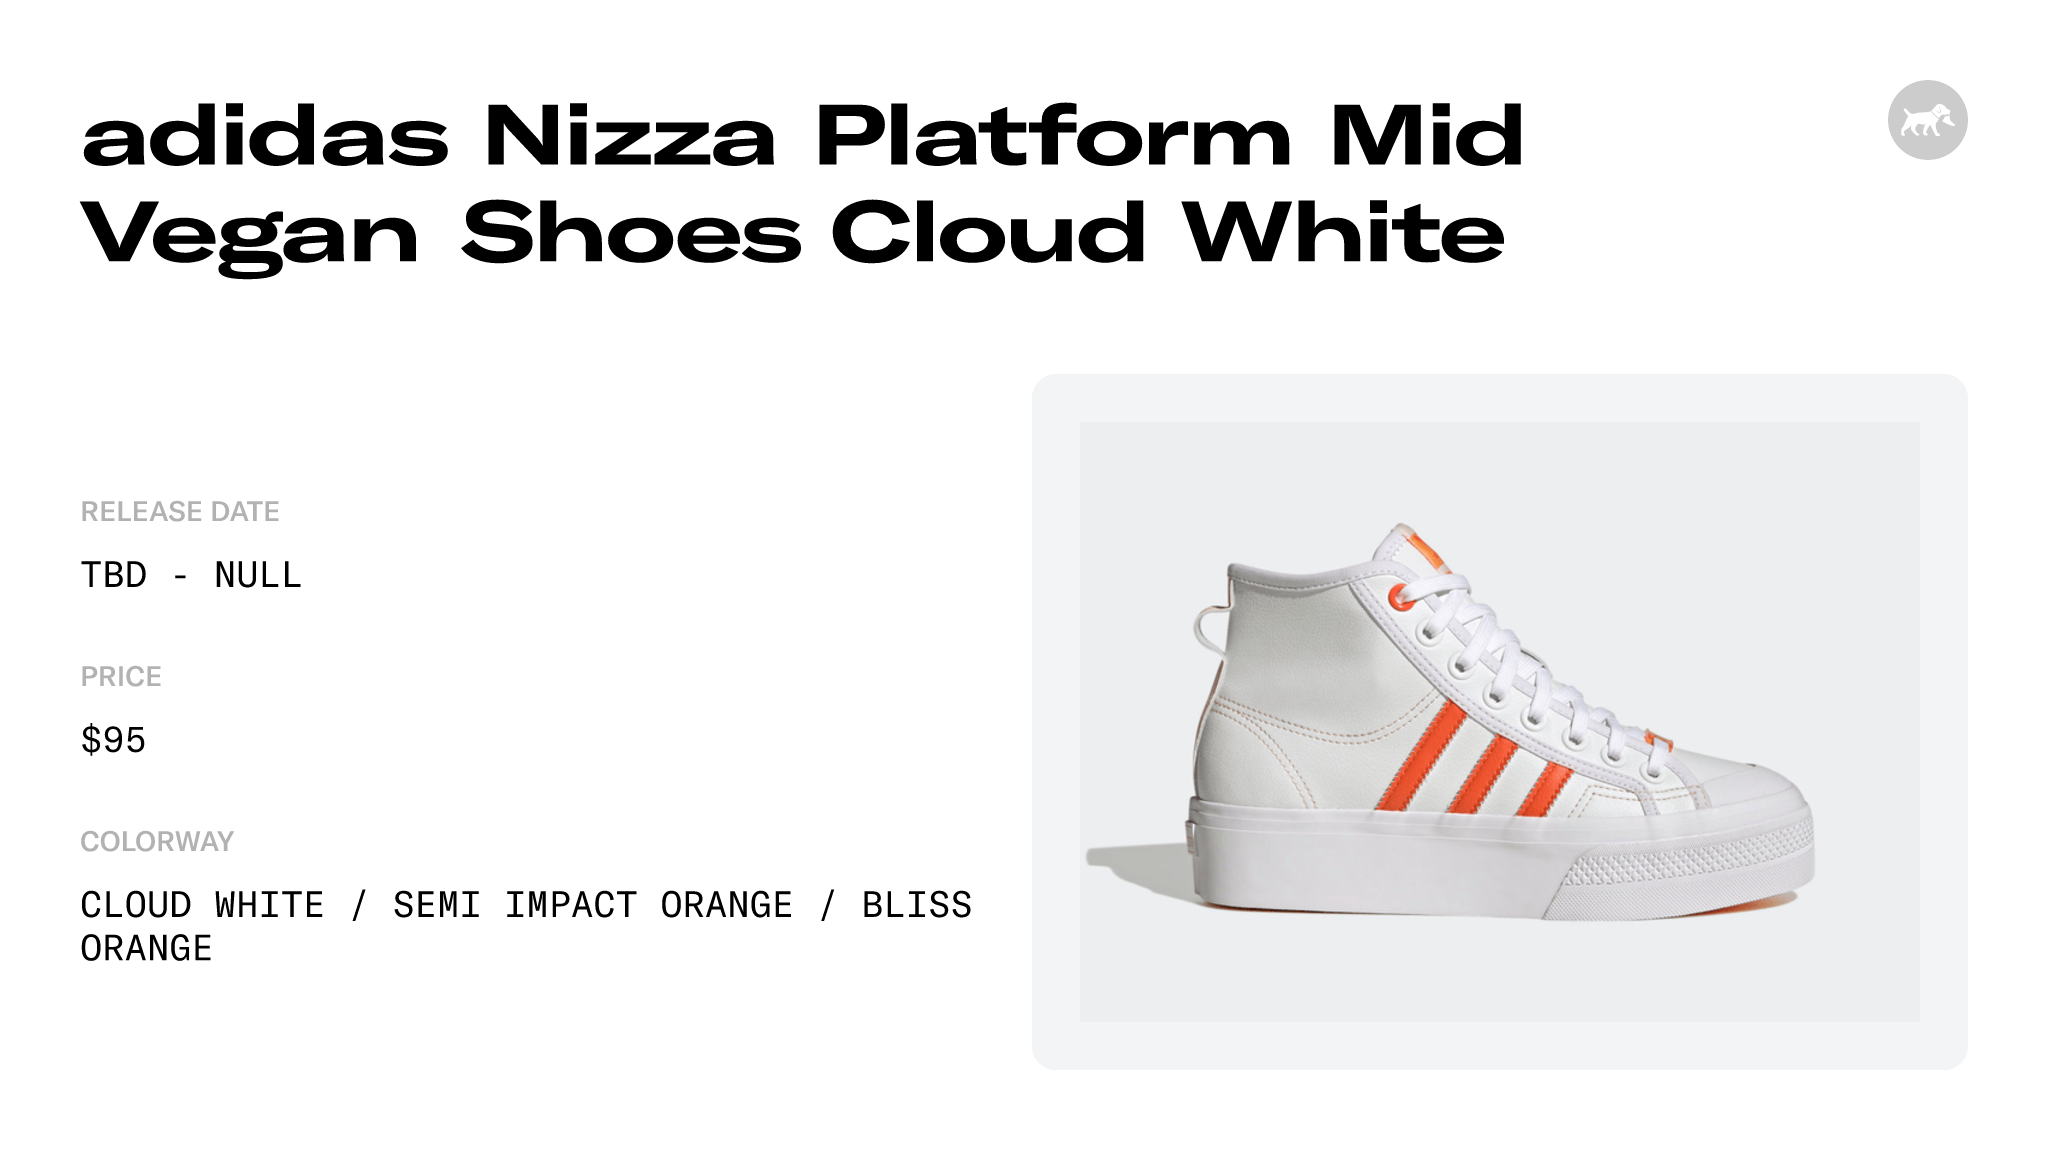 adidas Nizza Platform Mid and Shoes Cloud GY1897 Vegan - White Raffles Release Date